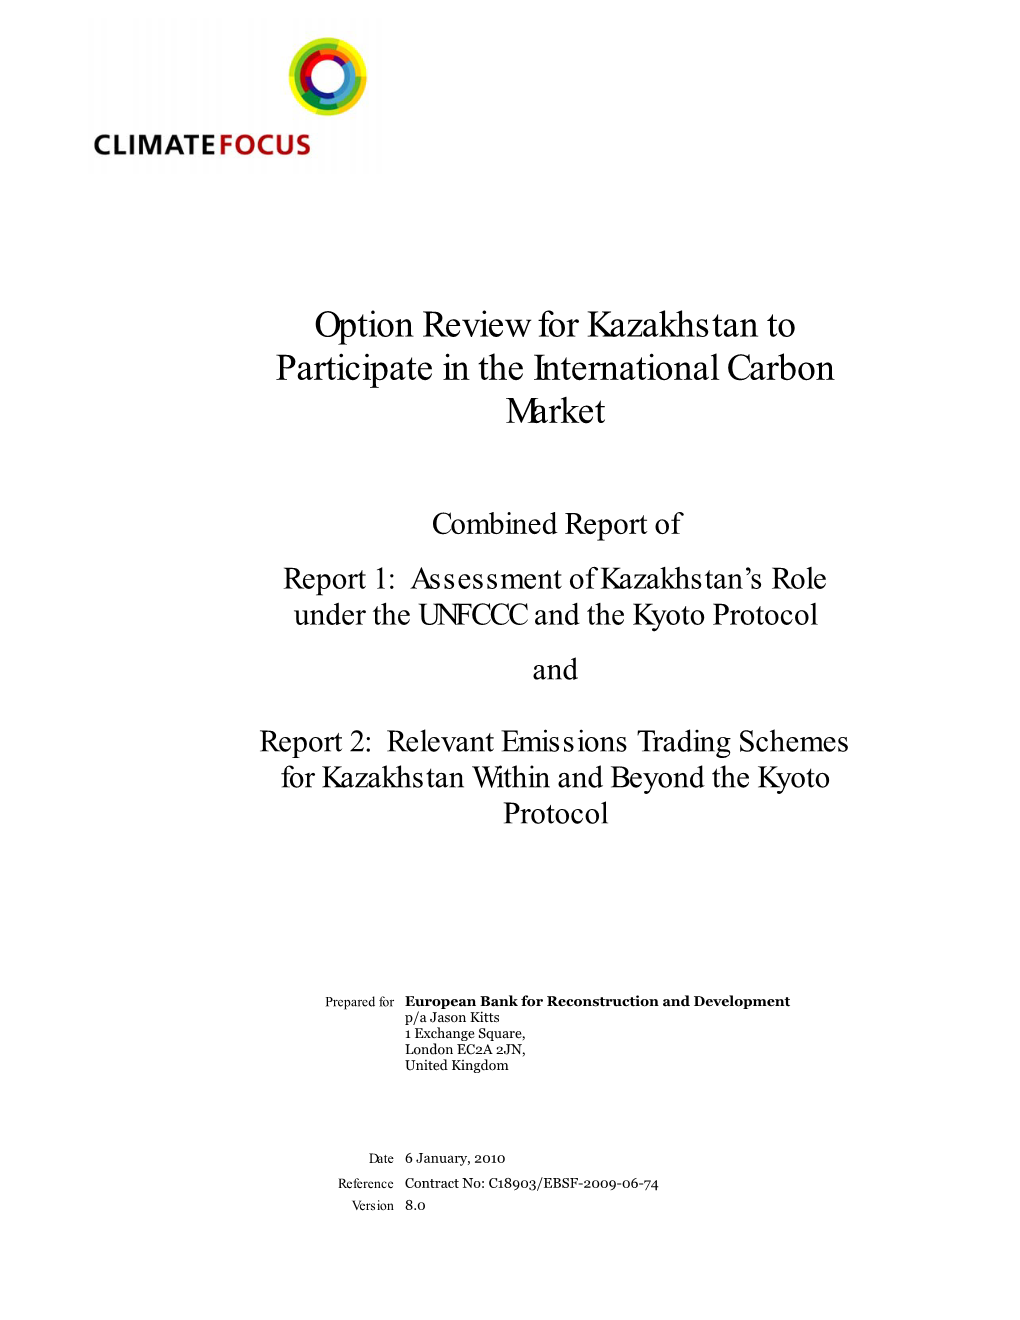 Option Review for Kazakhstan to Participate in the International Carbon Market